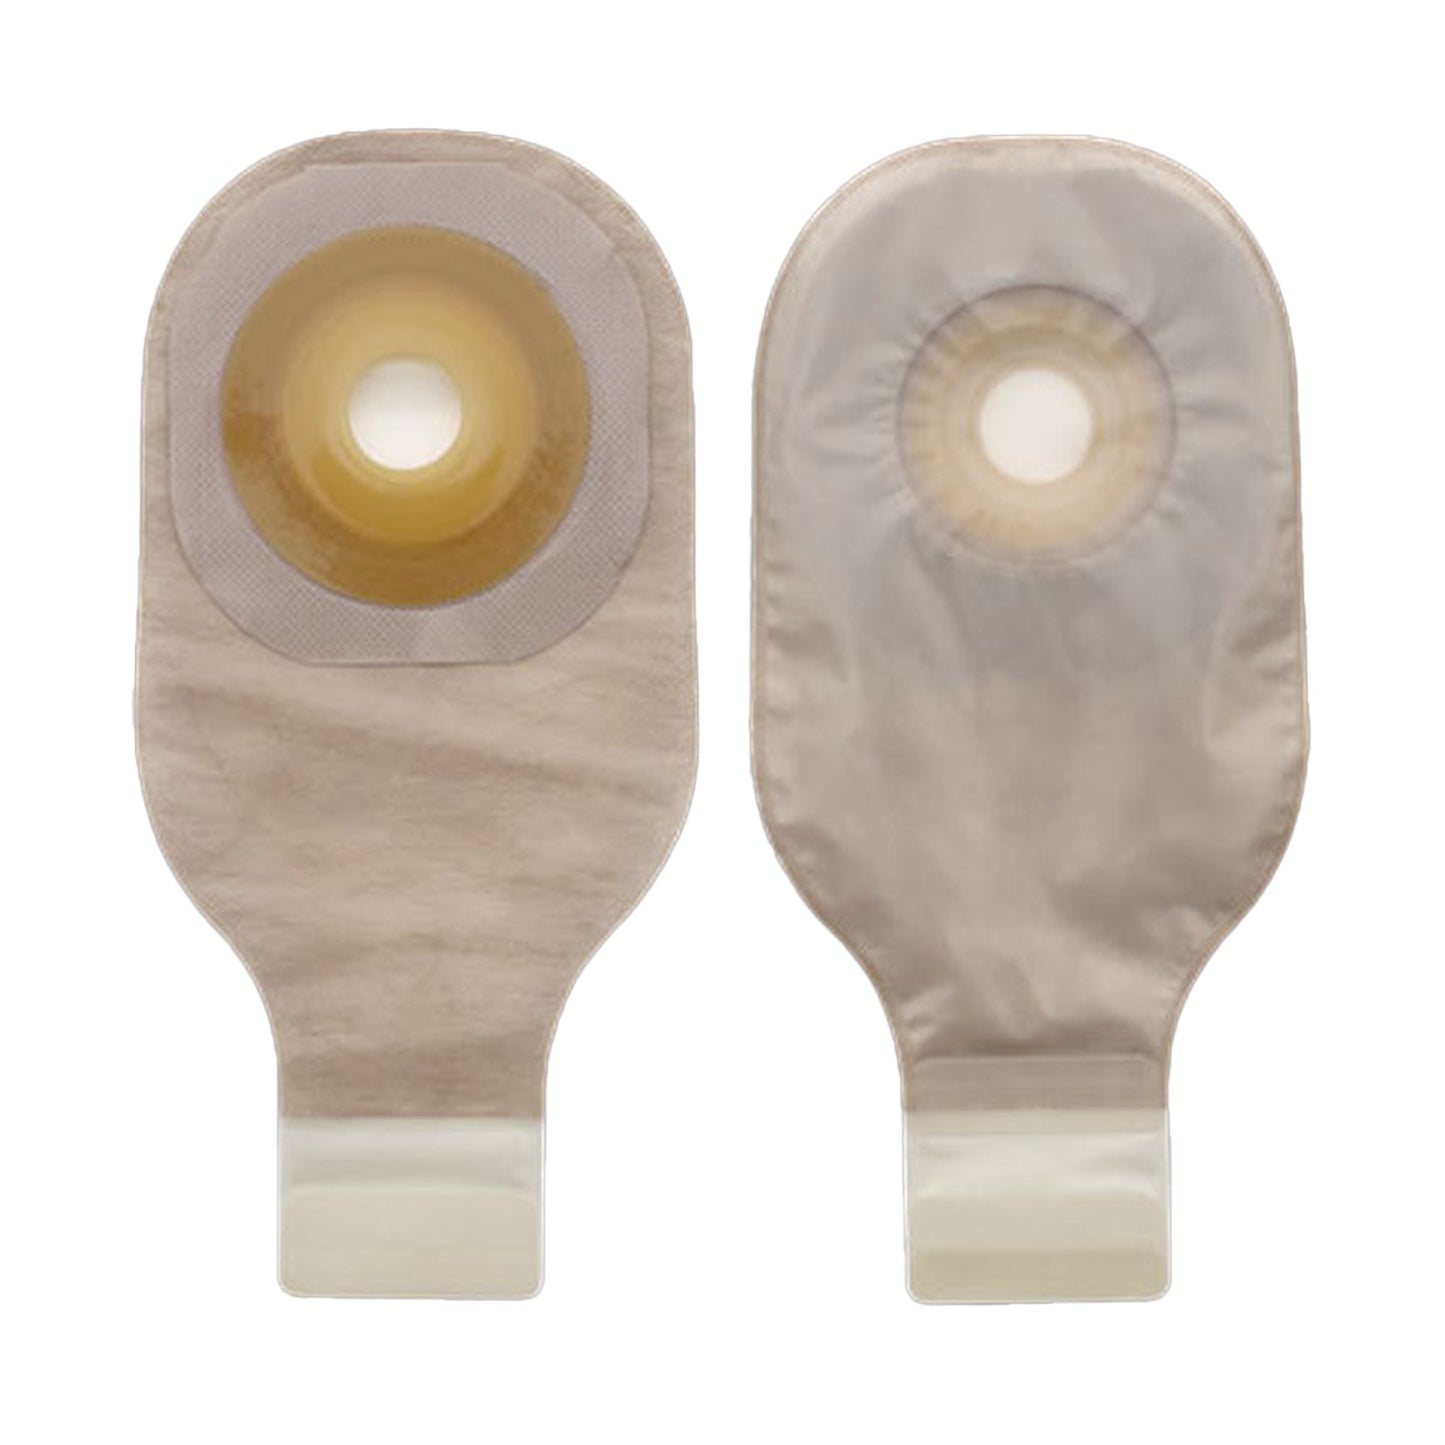 Premier™ One-Piece Drainable Transparent Colostomy Pouch, 12 Inch Length, 1-1/8 Inch Stoma, 5 ct